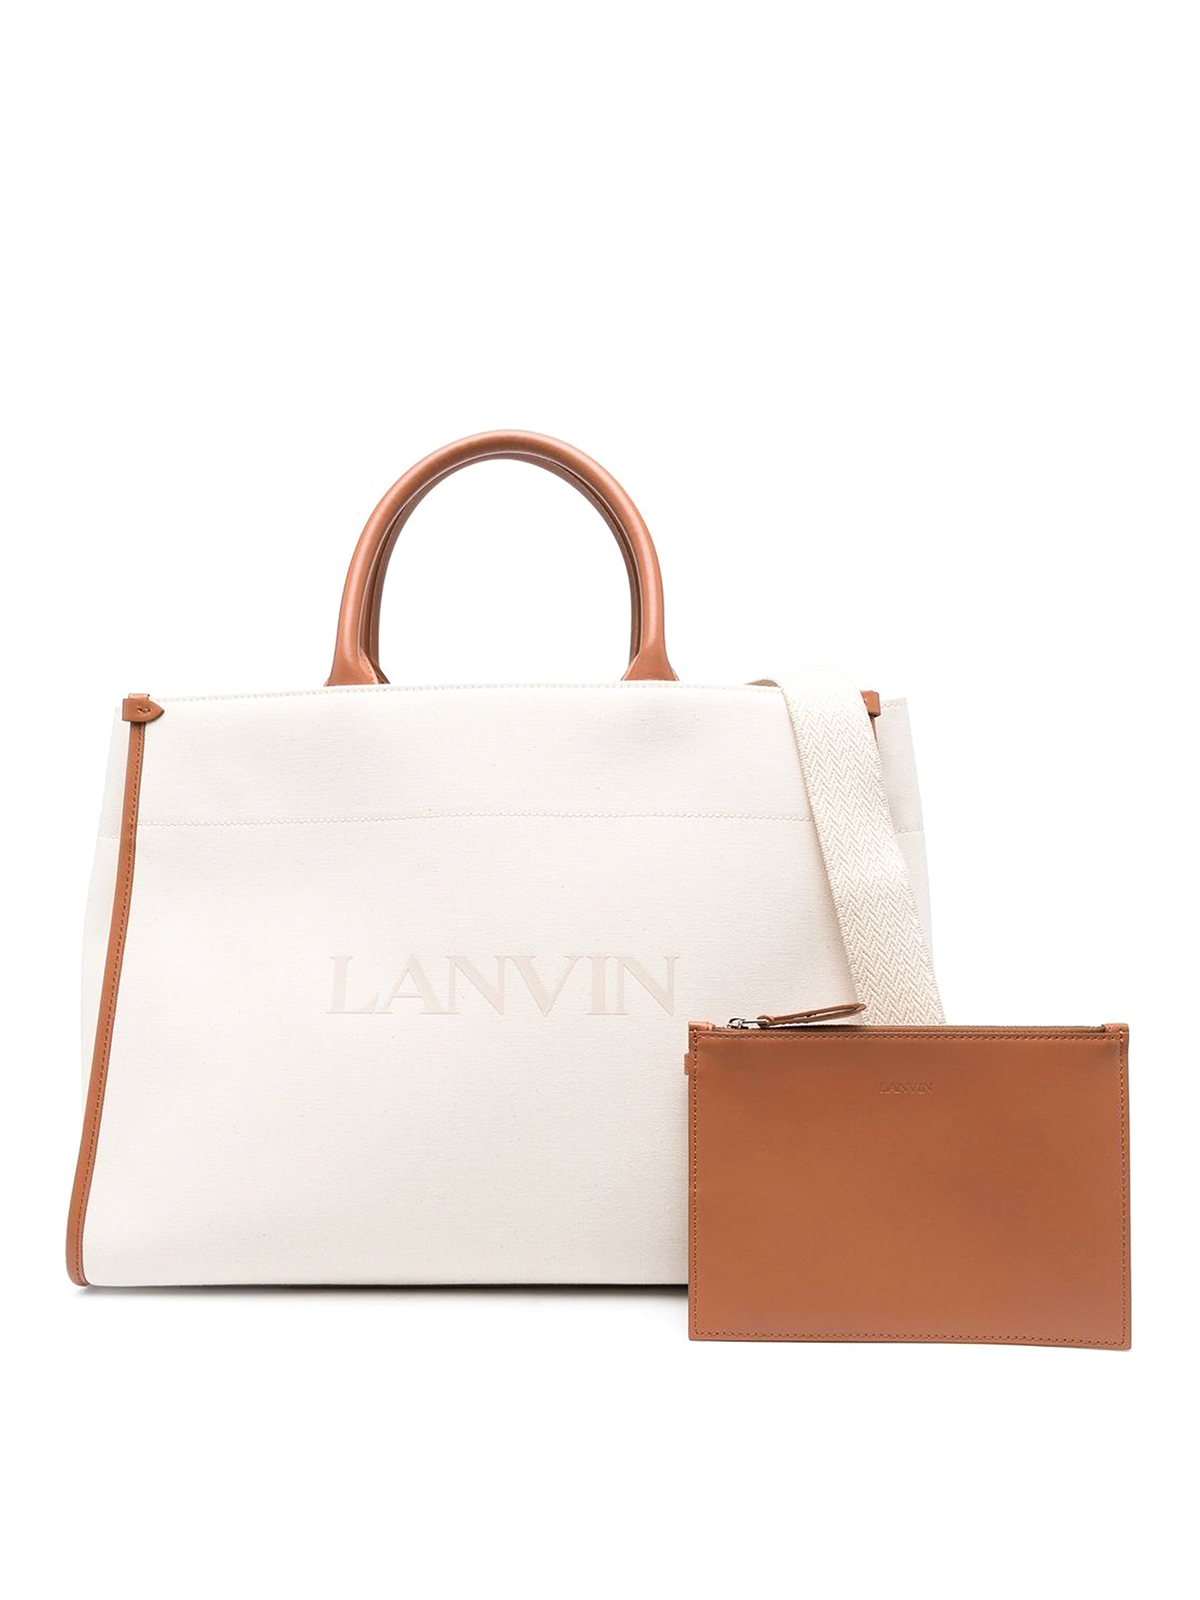 LANVIN LEATHER BAG WITH LOGO AND CONTRASTING TRIM